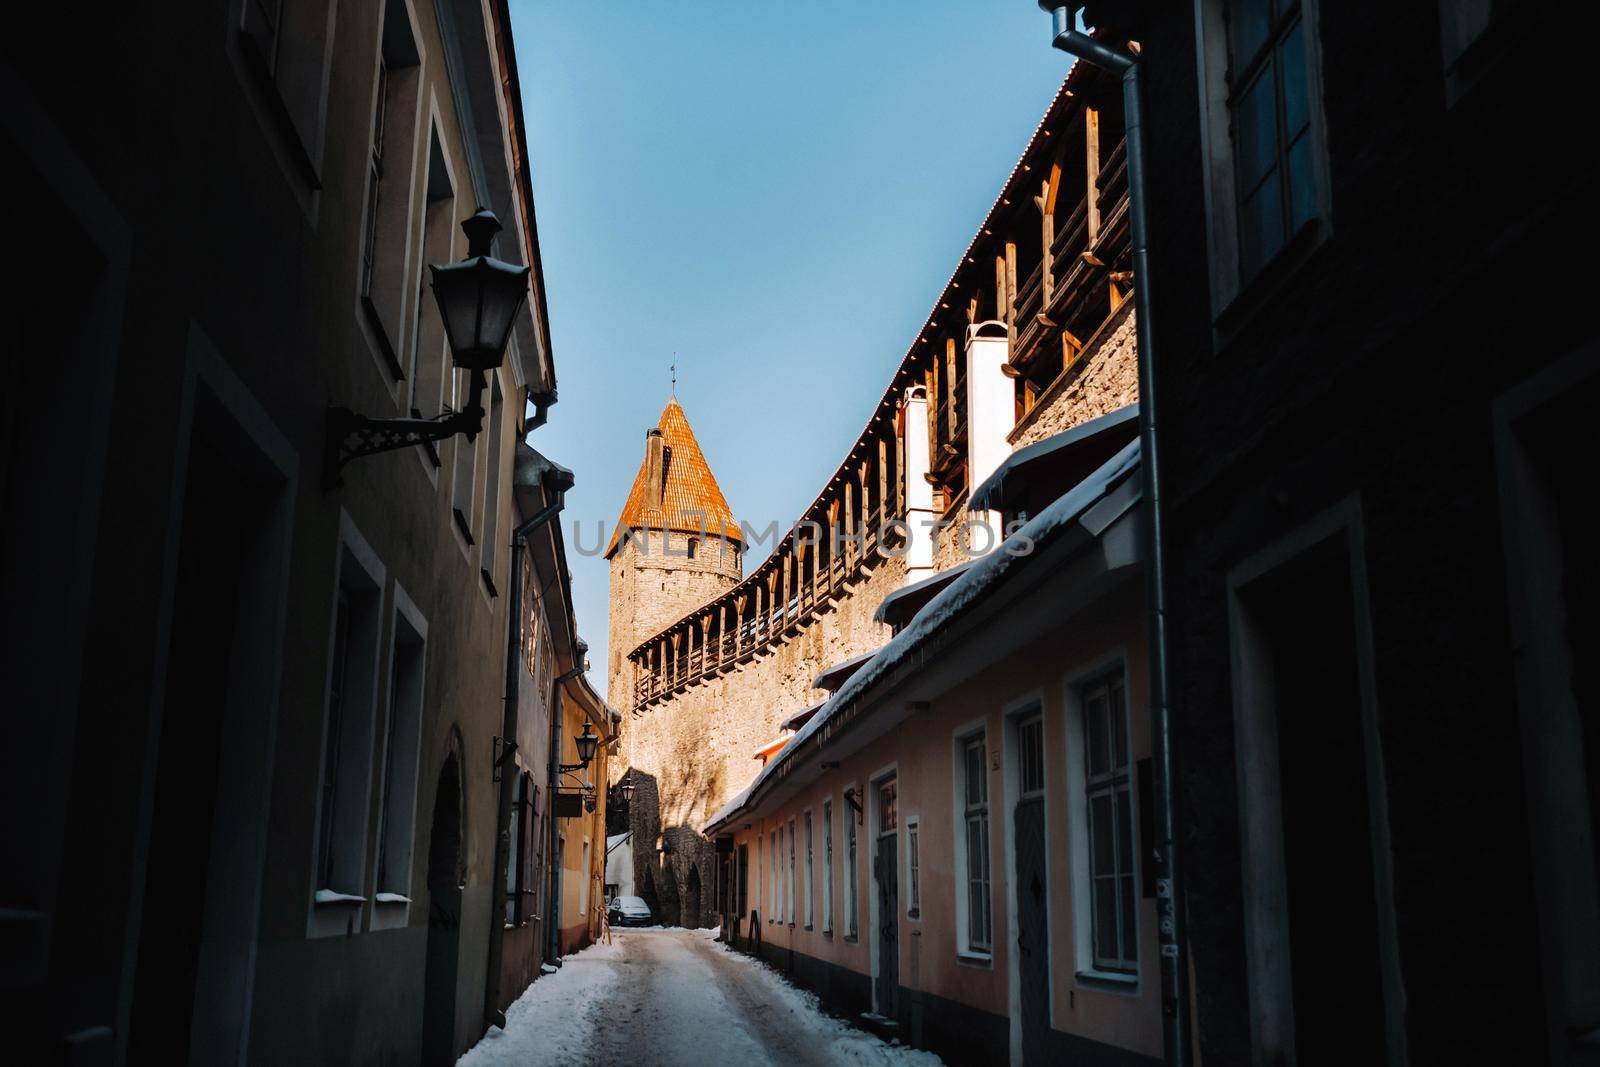 Winter View of the old town of Tallinn.Snow-covered city near the Baltic sea. Estonia by Lobachad